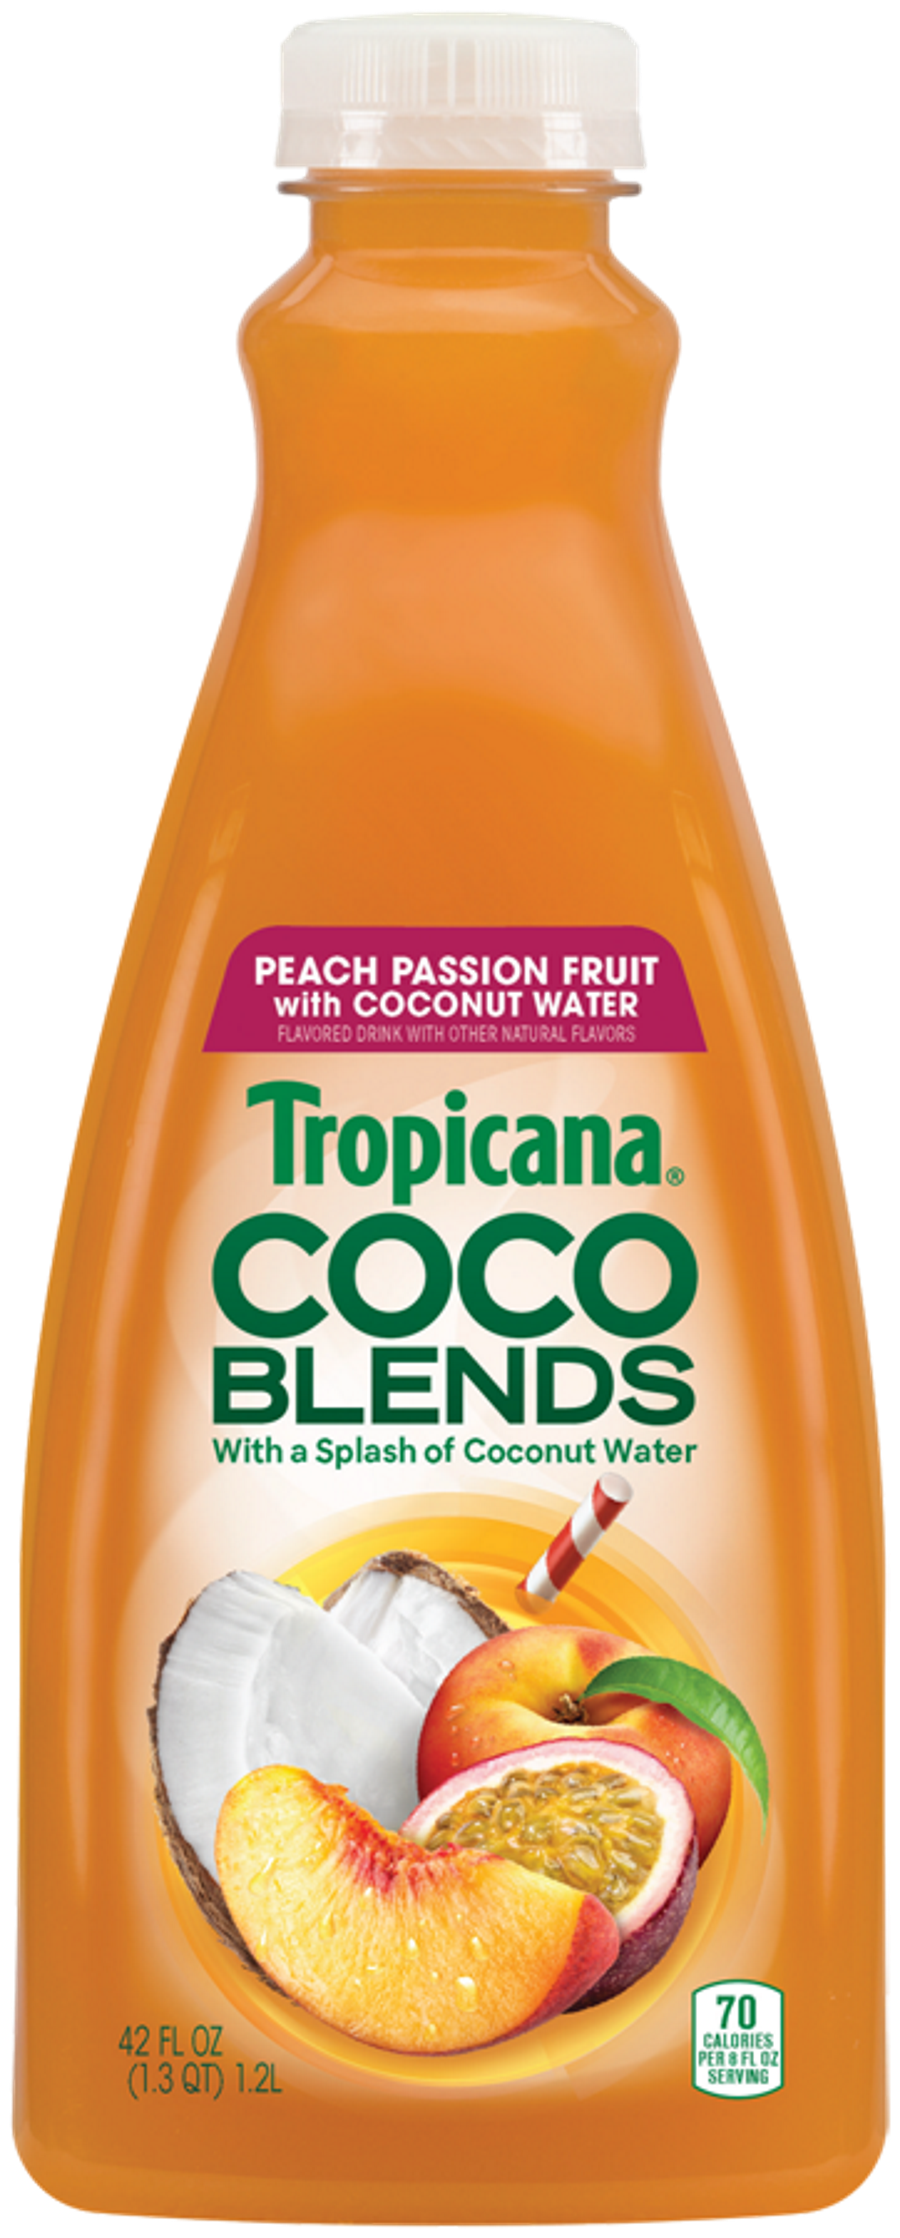 Tropicana CocoBlends PeachPassionFruit